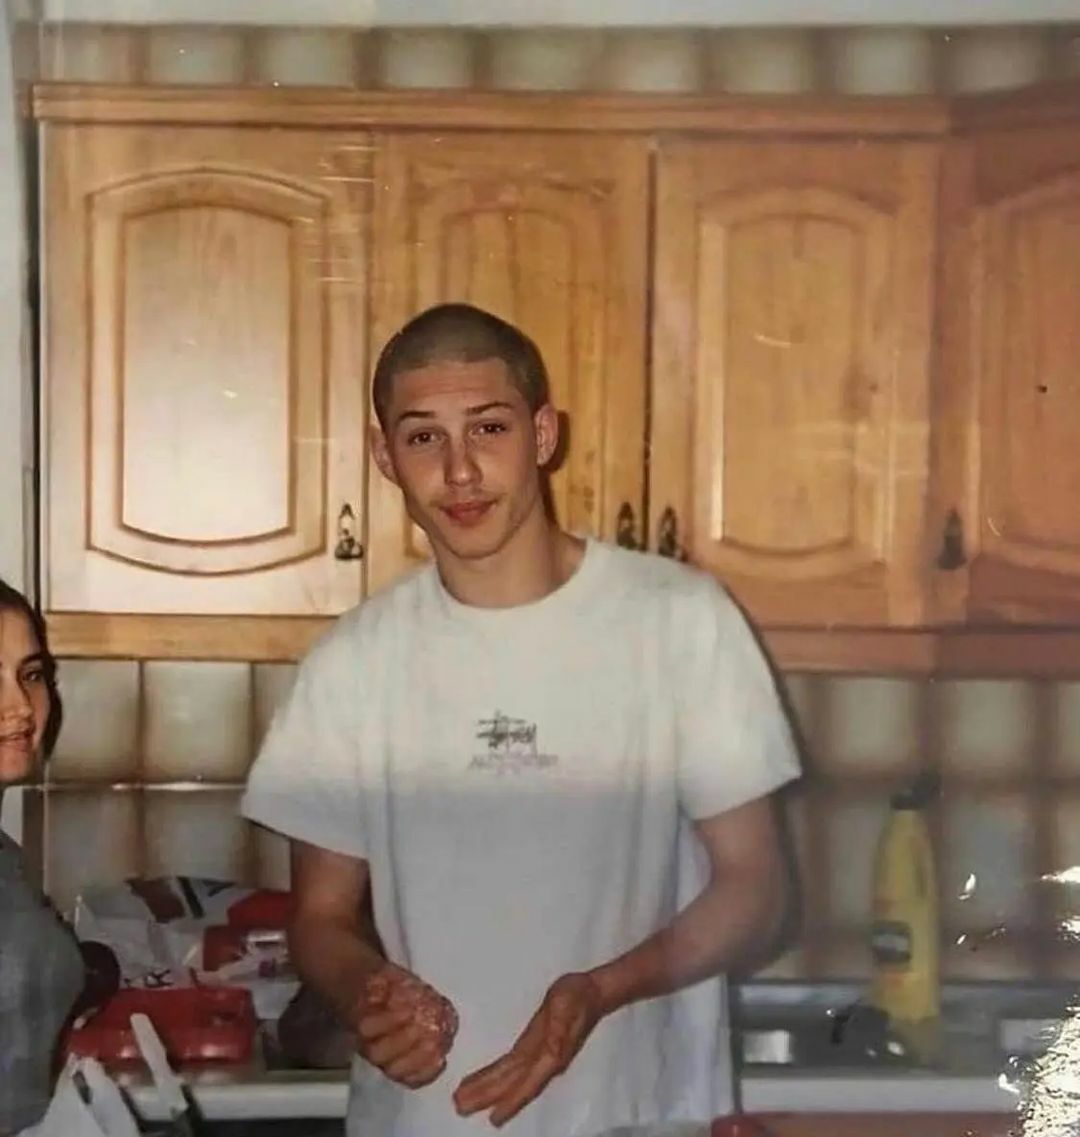 17-Yr-Old Tom Hardy Photographed In A Friend’s Kitchen In 1994